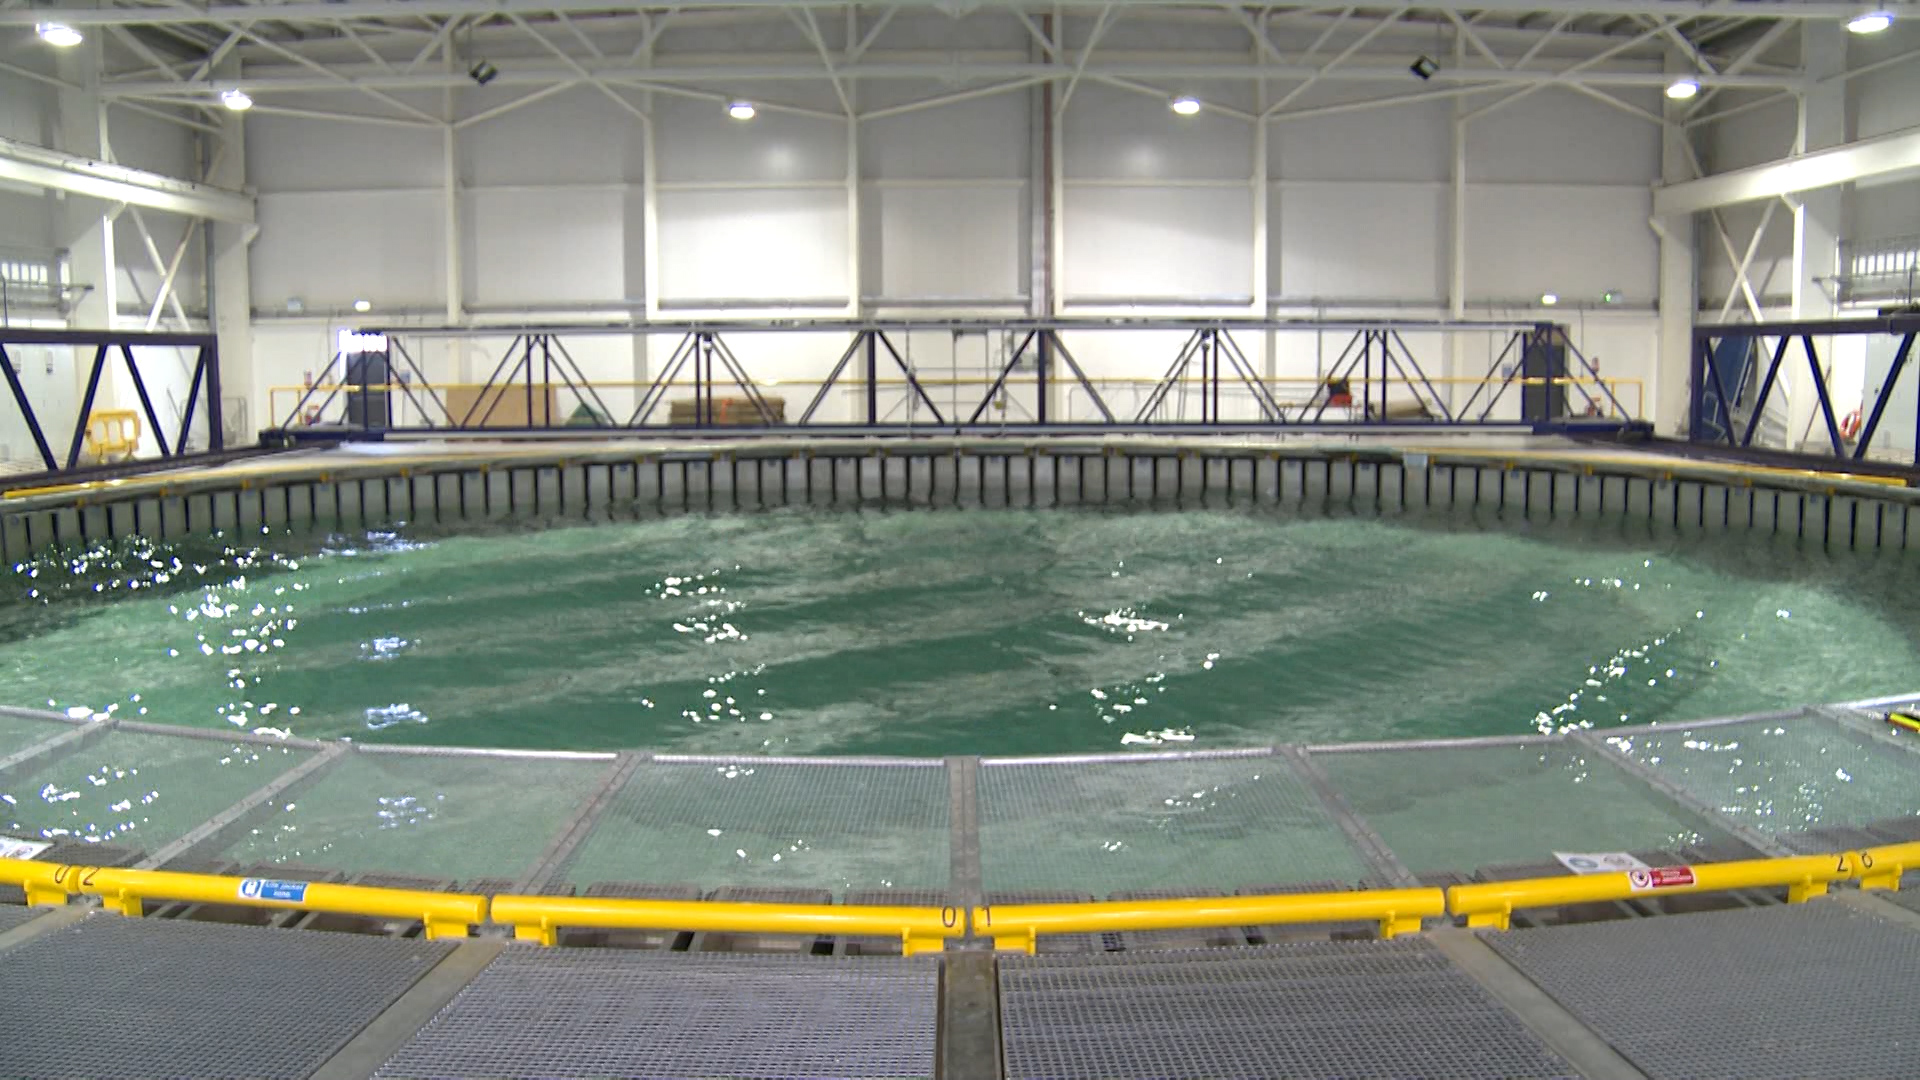 A periodic wave moving diagonally across the tank.